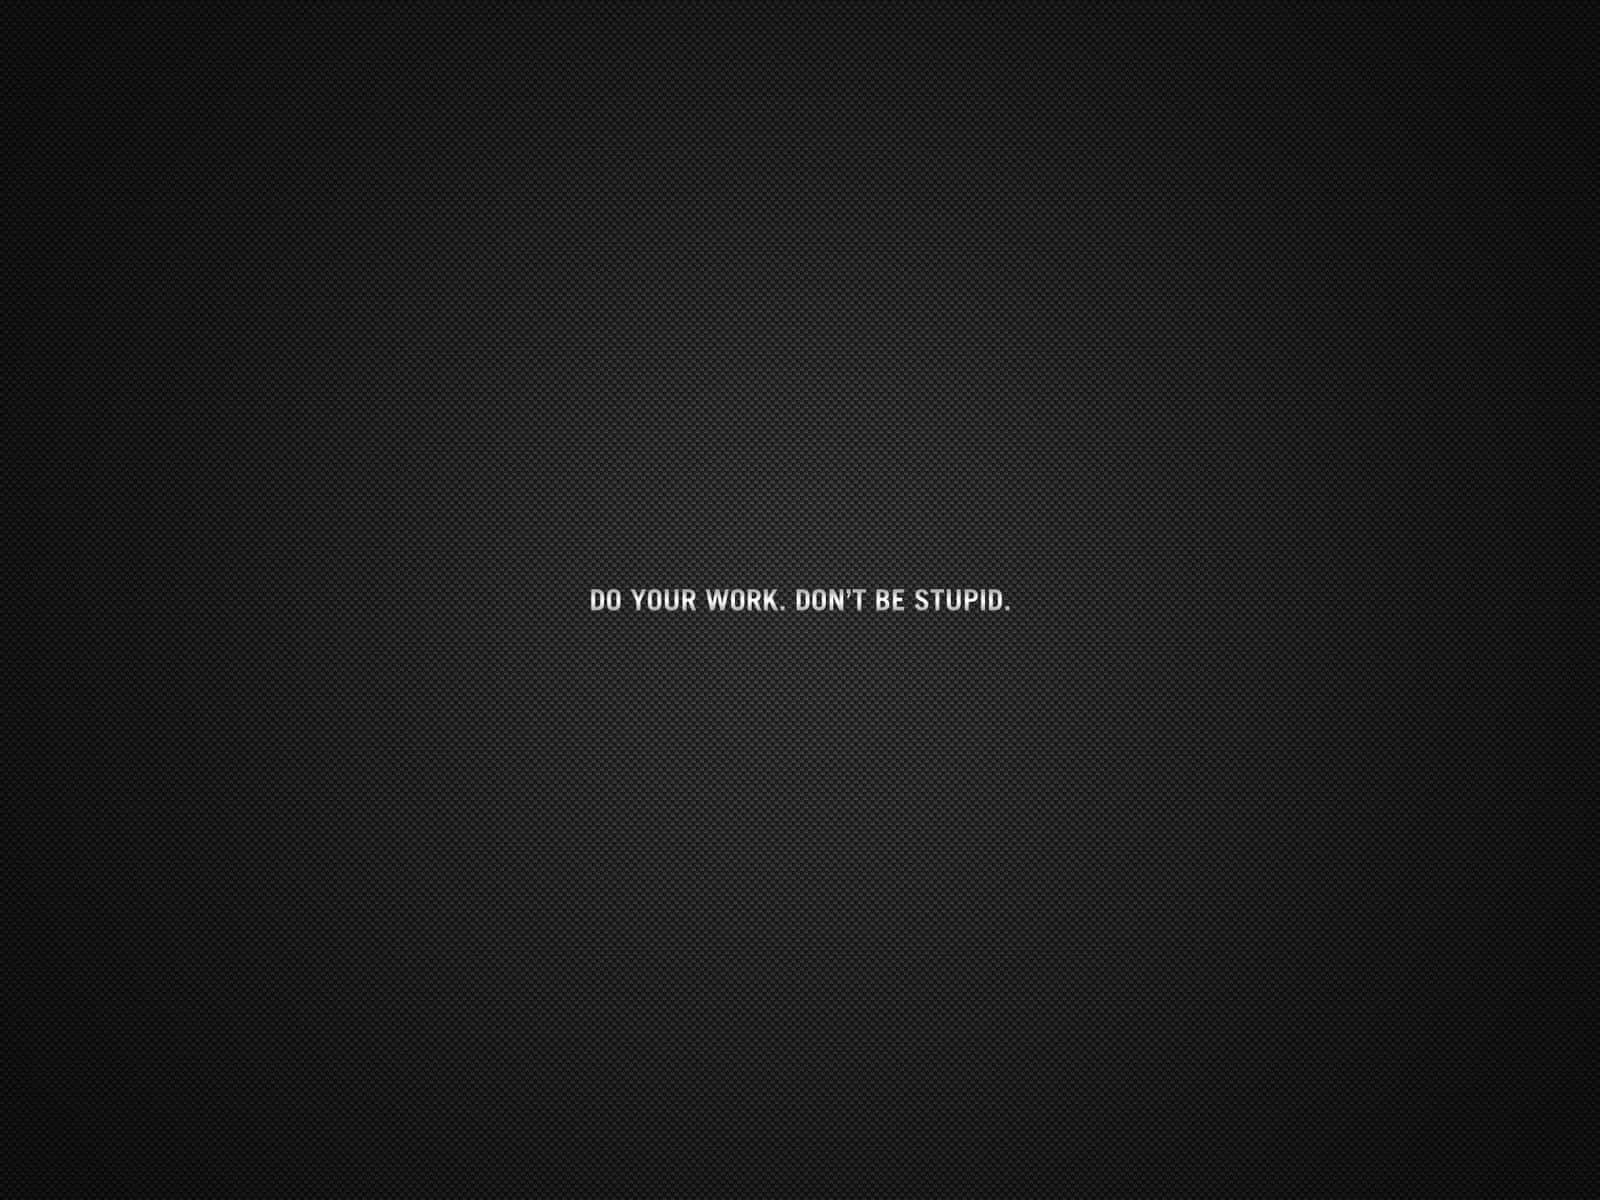 Inspirational quote on a black background